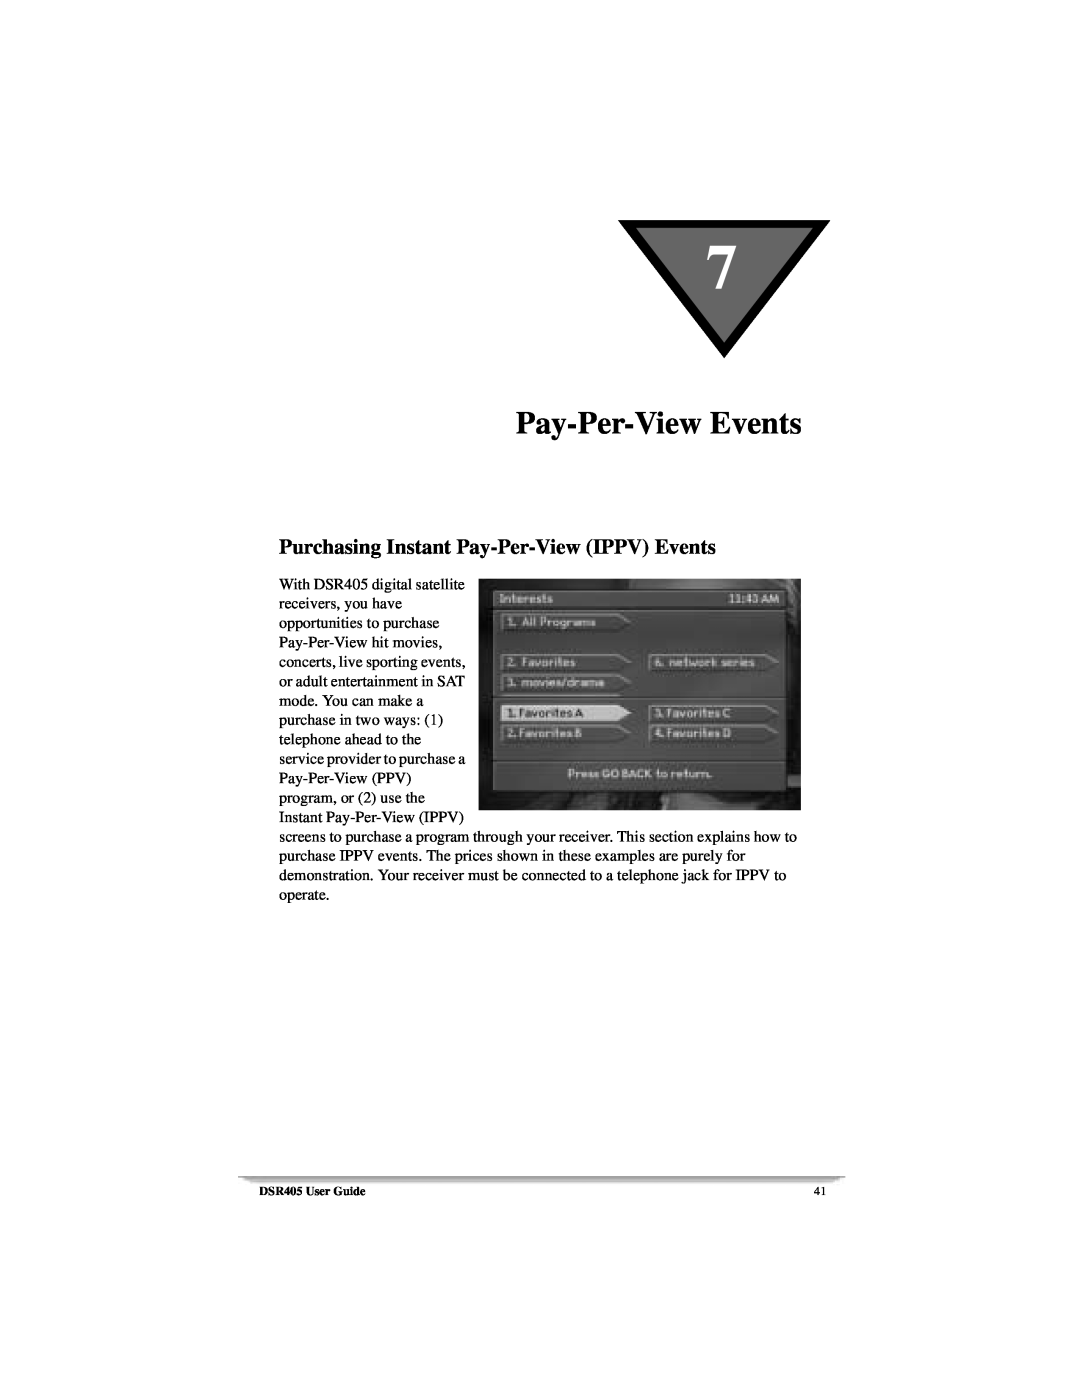 Motorola DSR405 manual Pay-Per-View Events, Purchasing Instant Pay-Per-View IPPV Events 